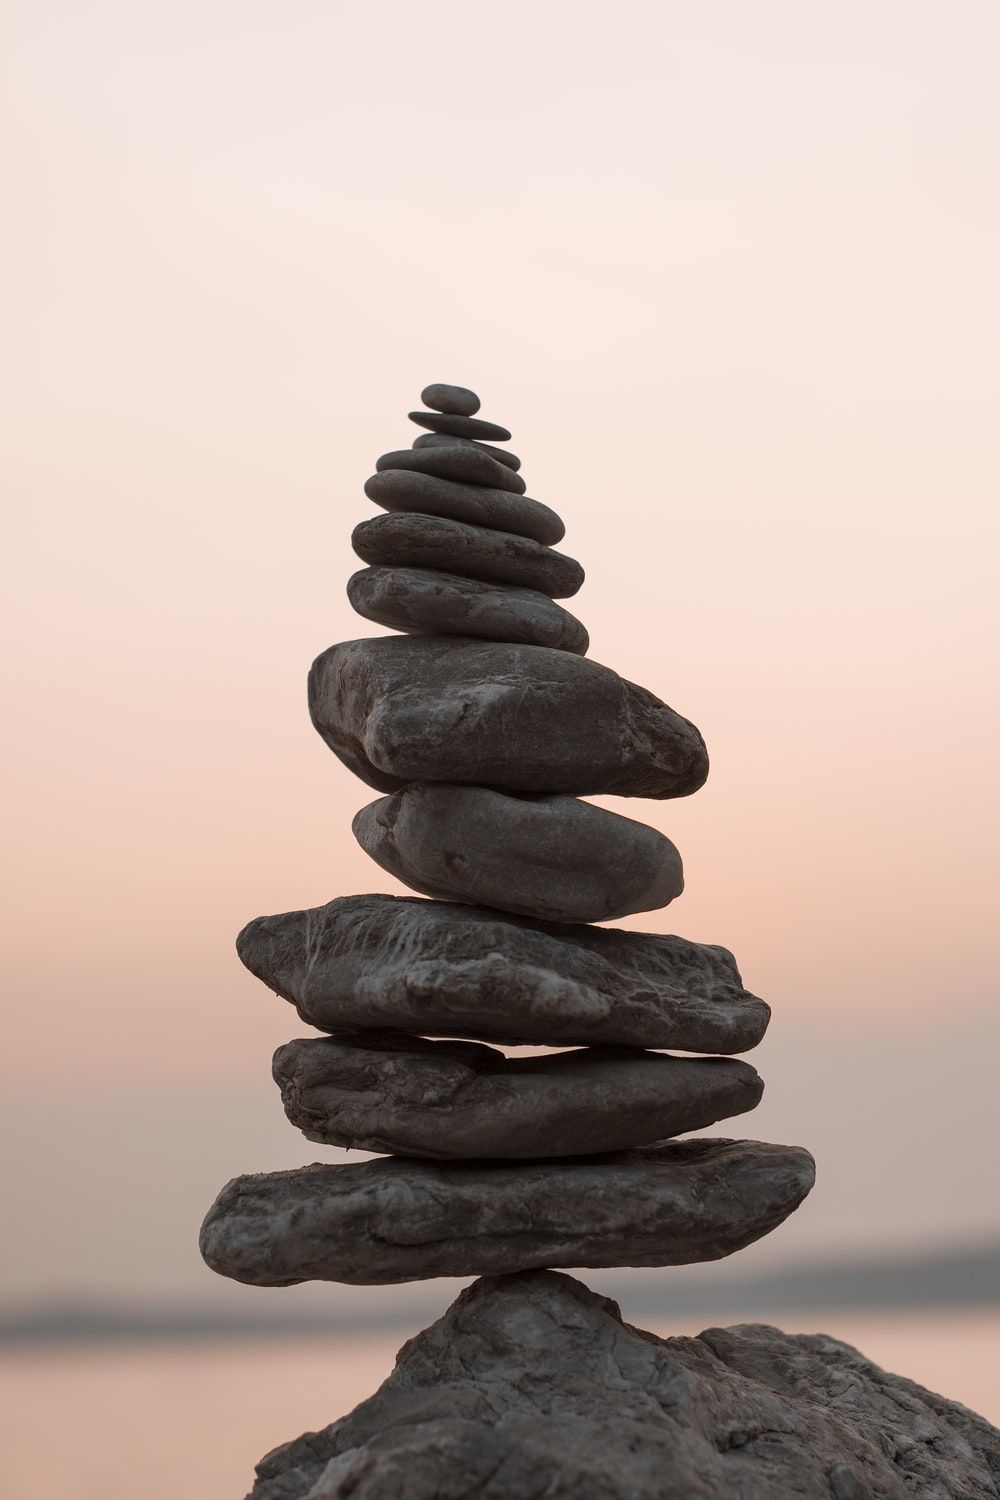 A stack of rocks in front of a sunset - Balance, rocks